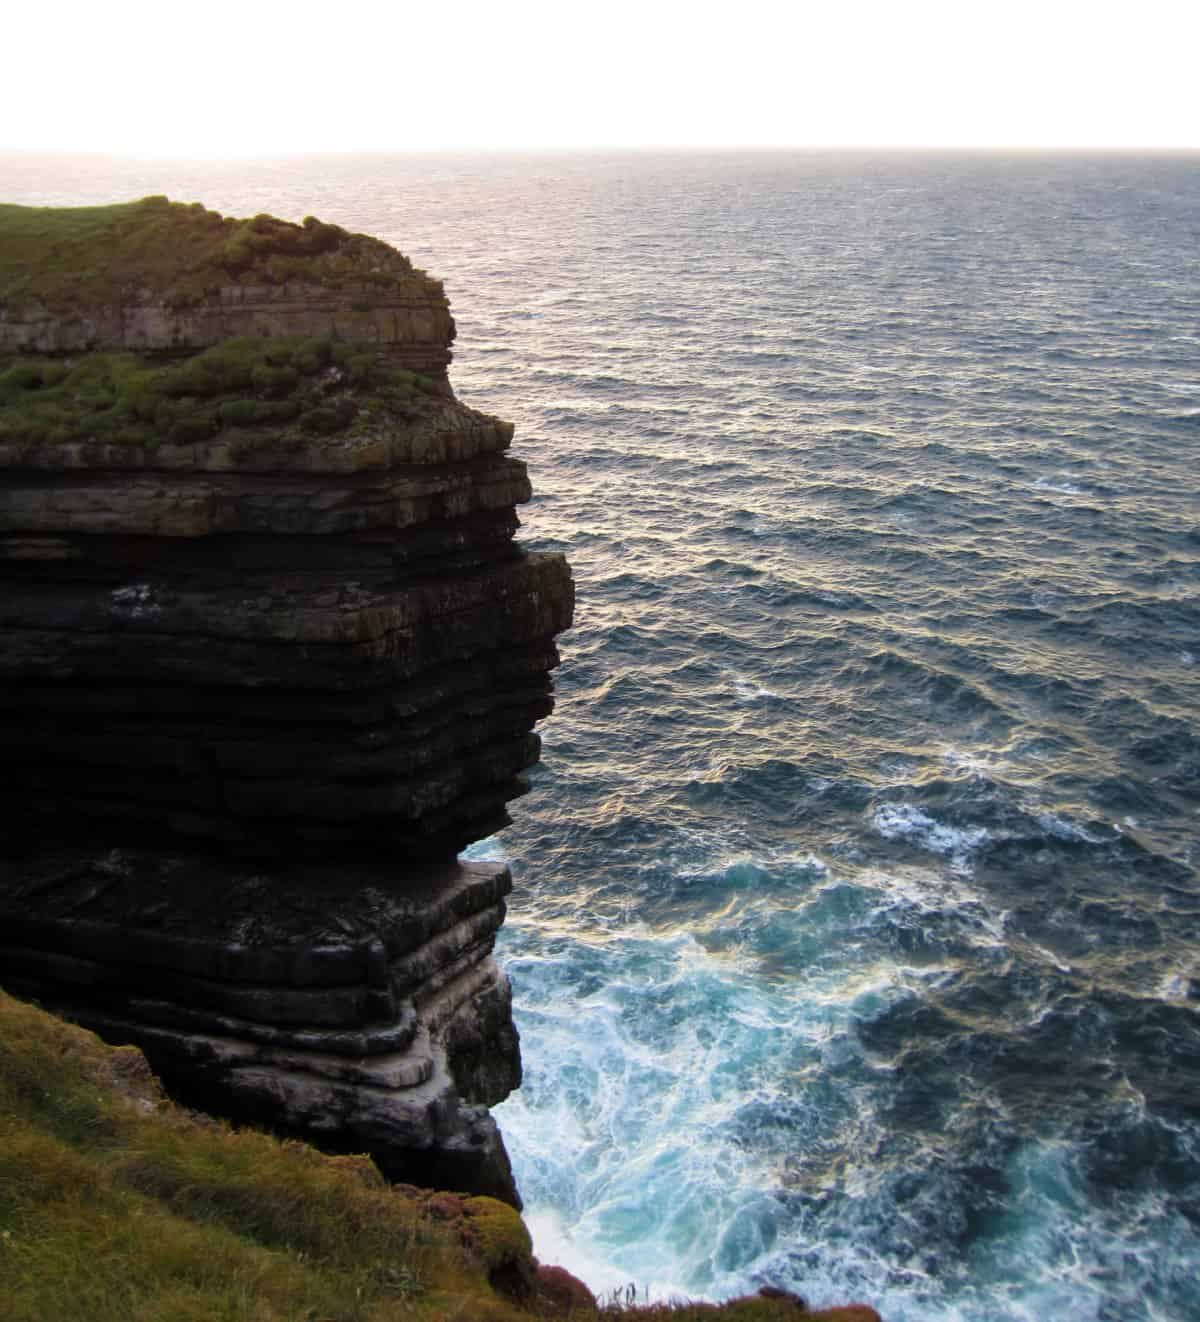 why you should skip the Cliffs of Moher & best alternative spots - Loop Head is an amazing choice